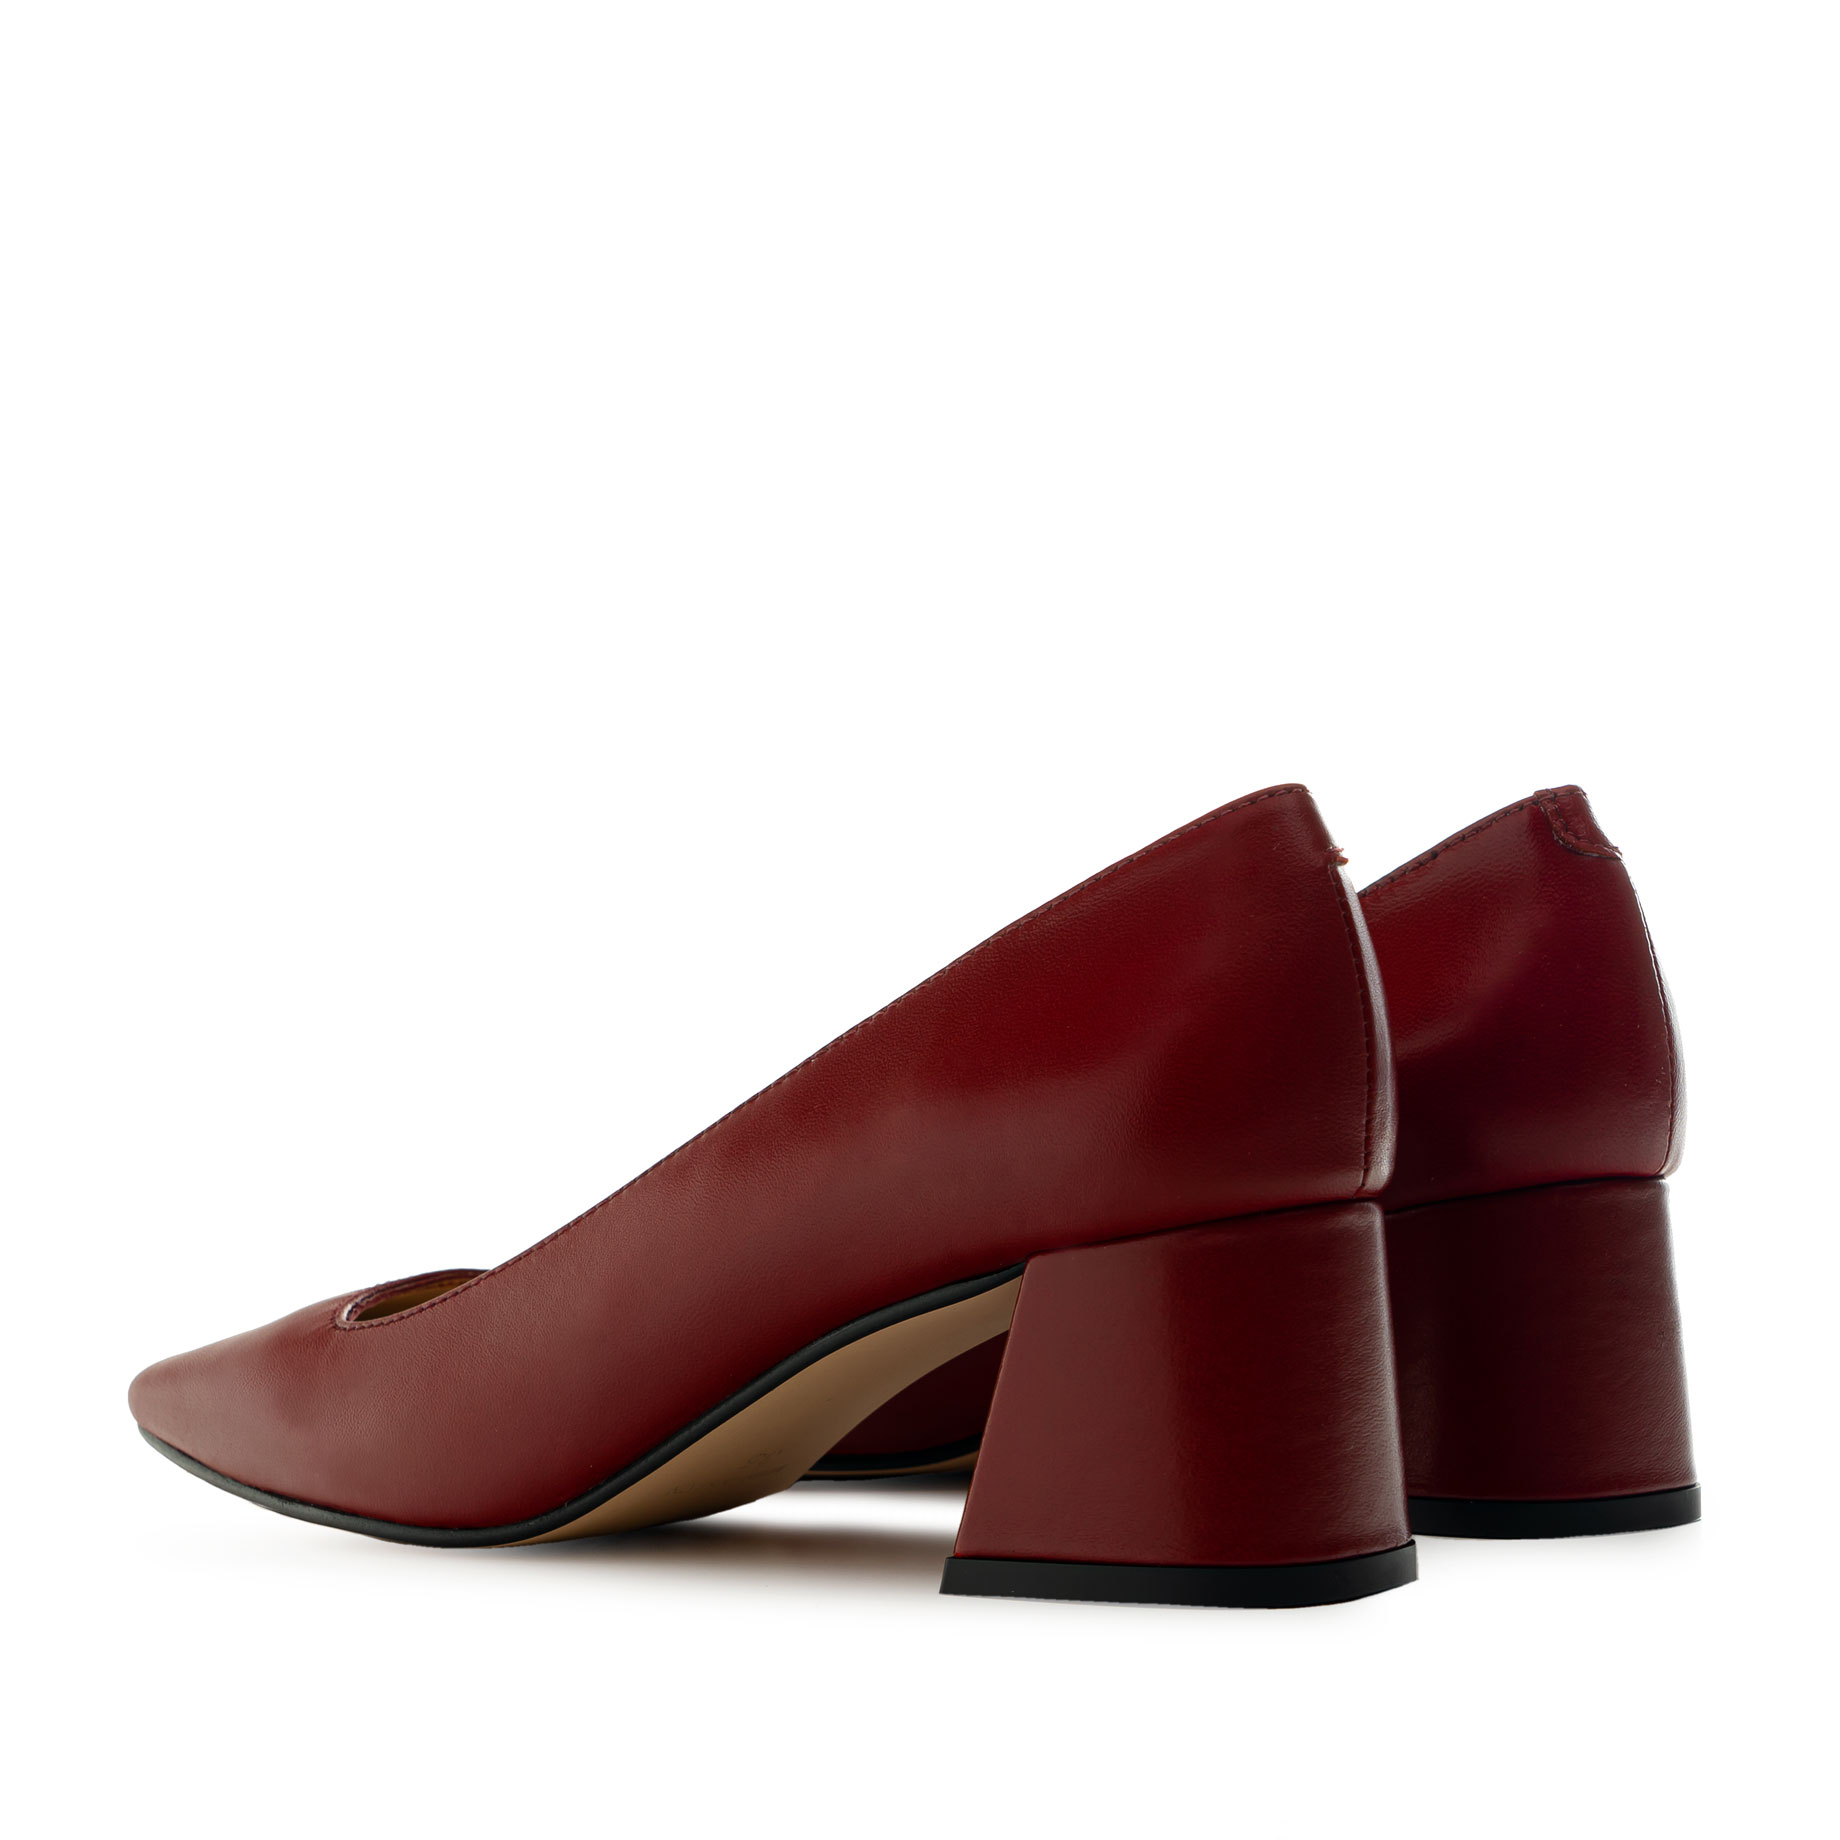 Court Shoes in Burgundy Leather 